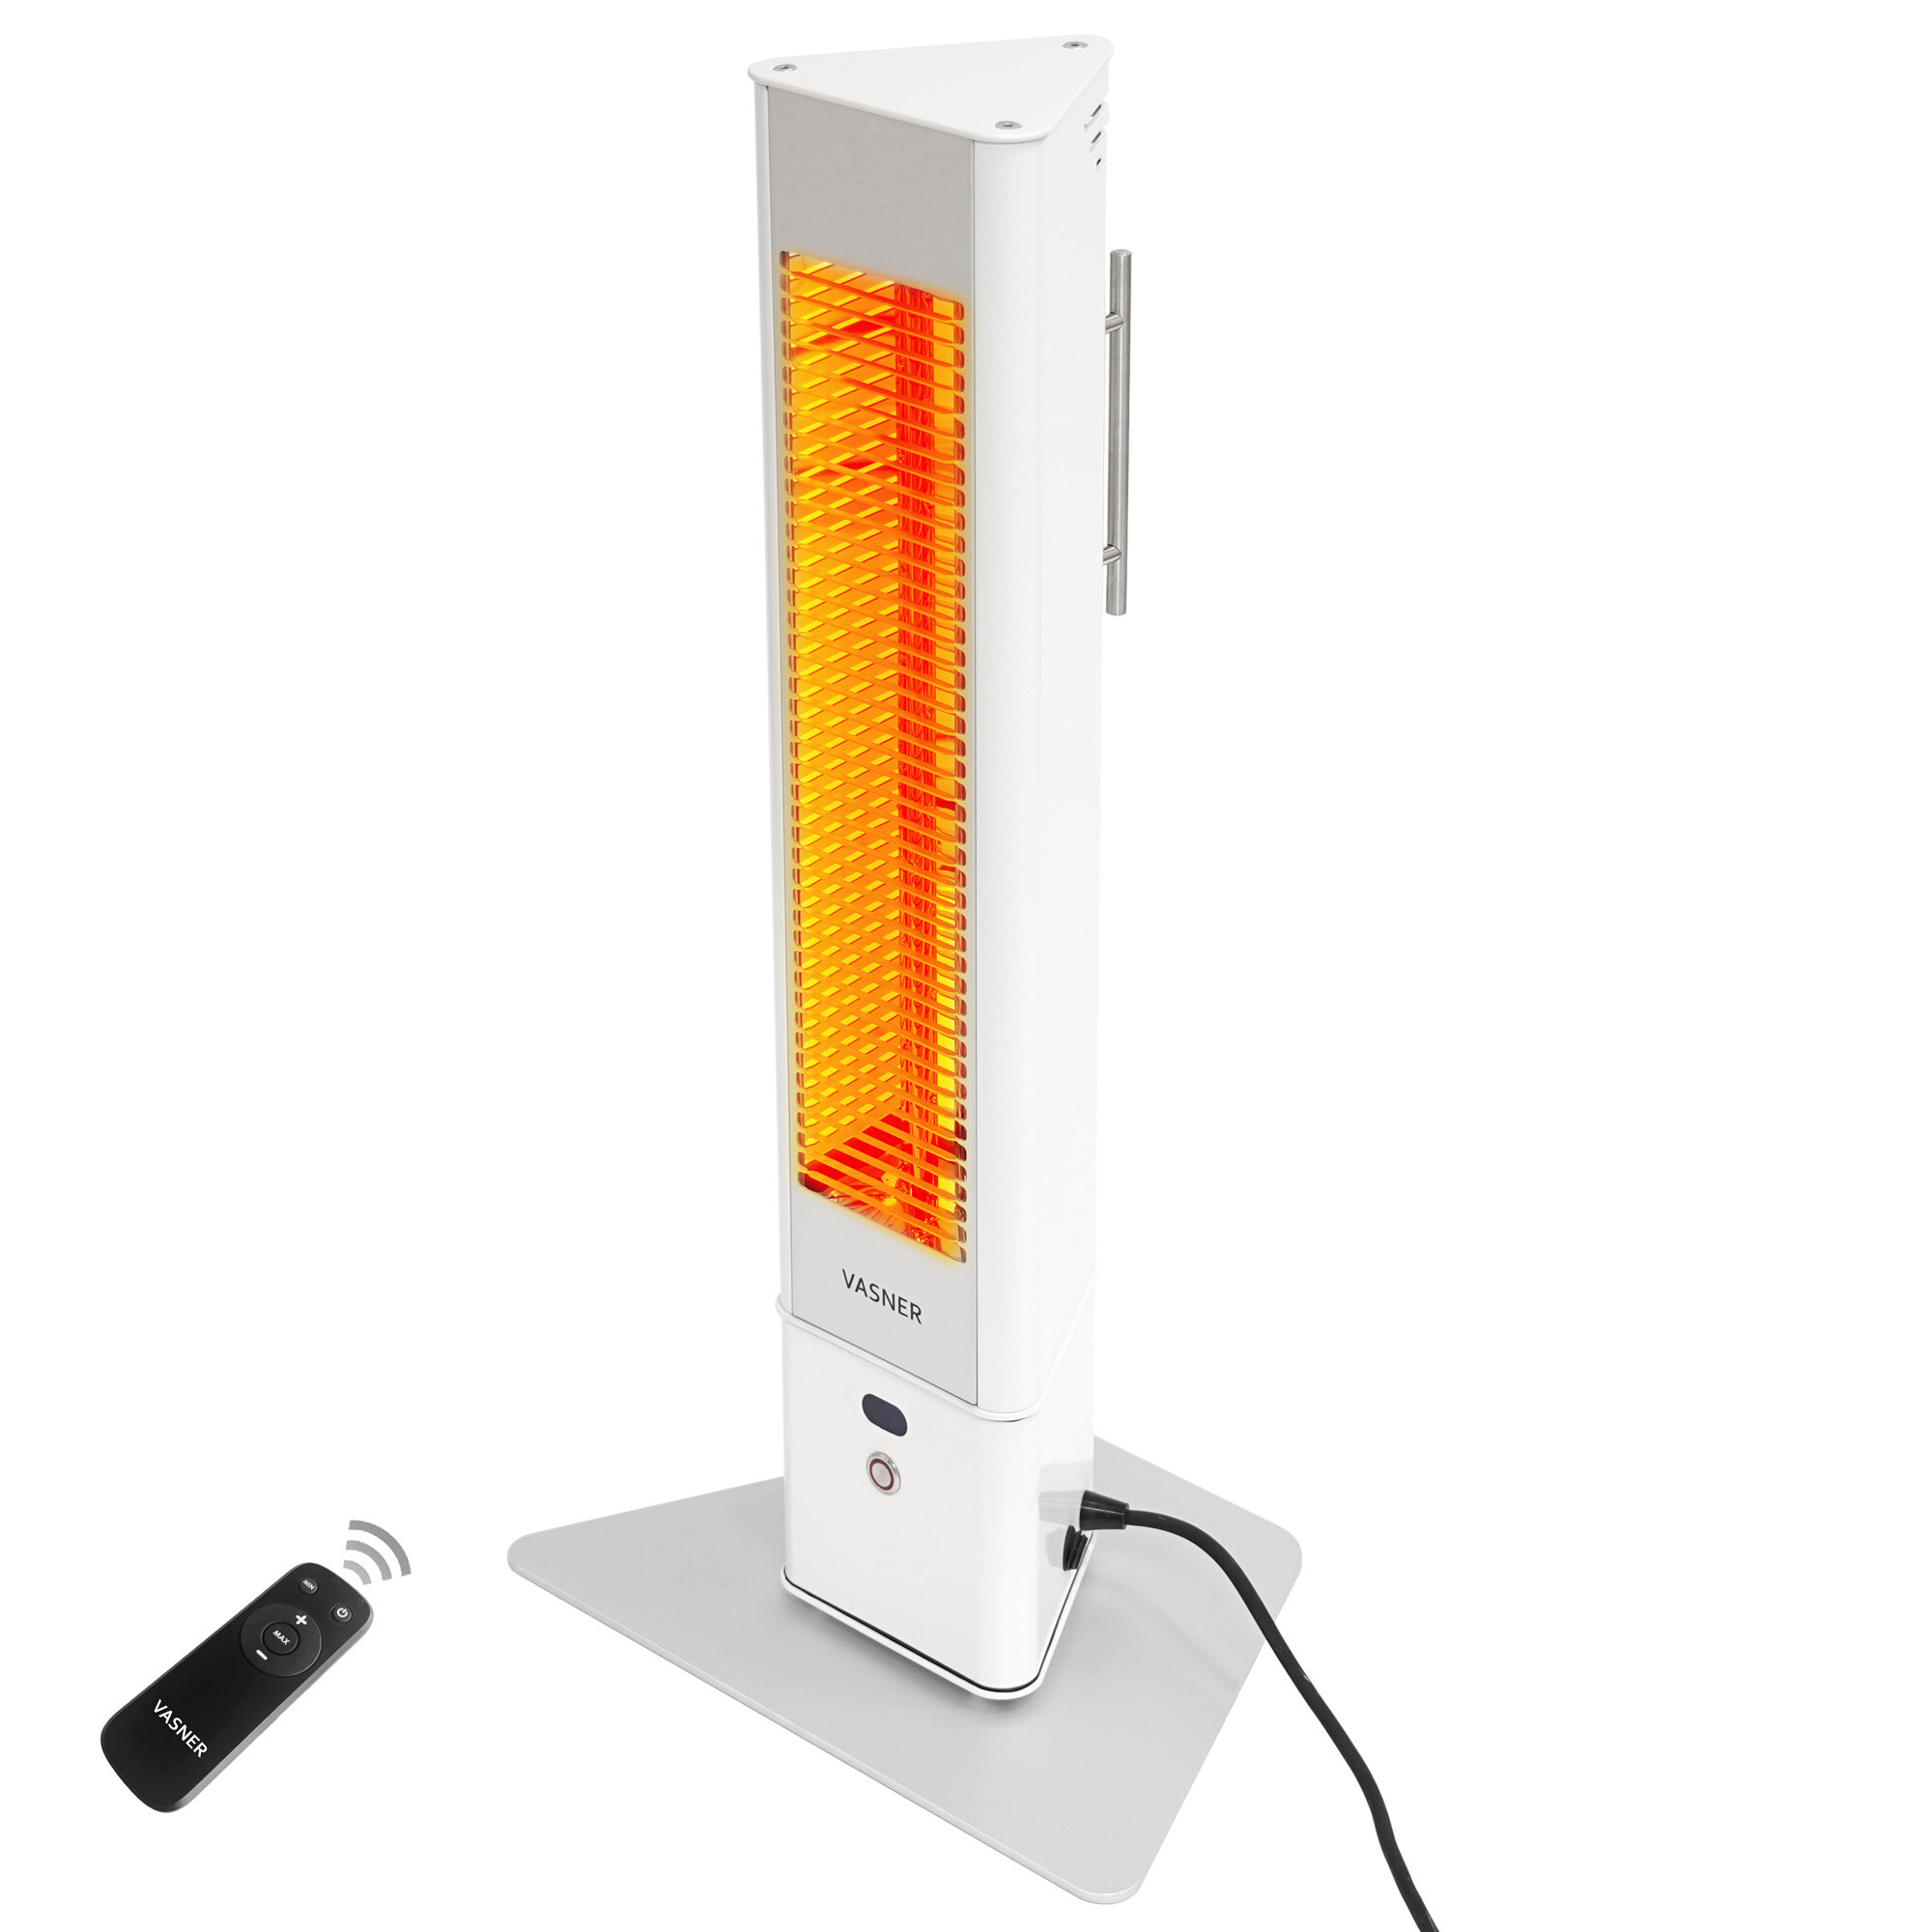 Portable outdoor heaters 100% made in Germany, 2 year warranty